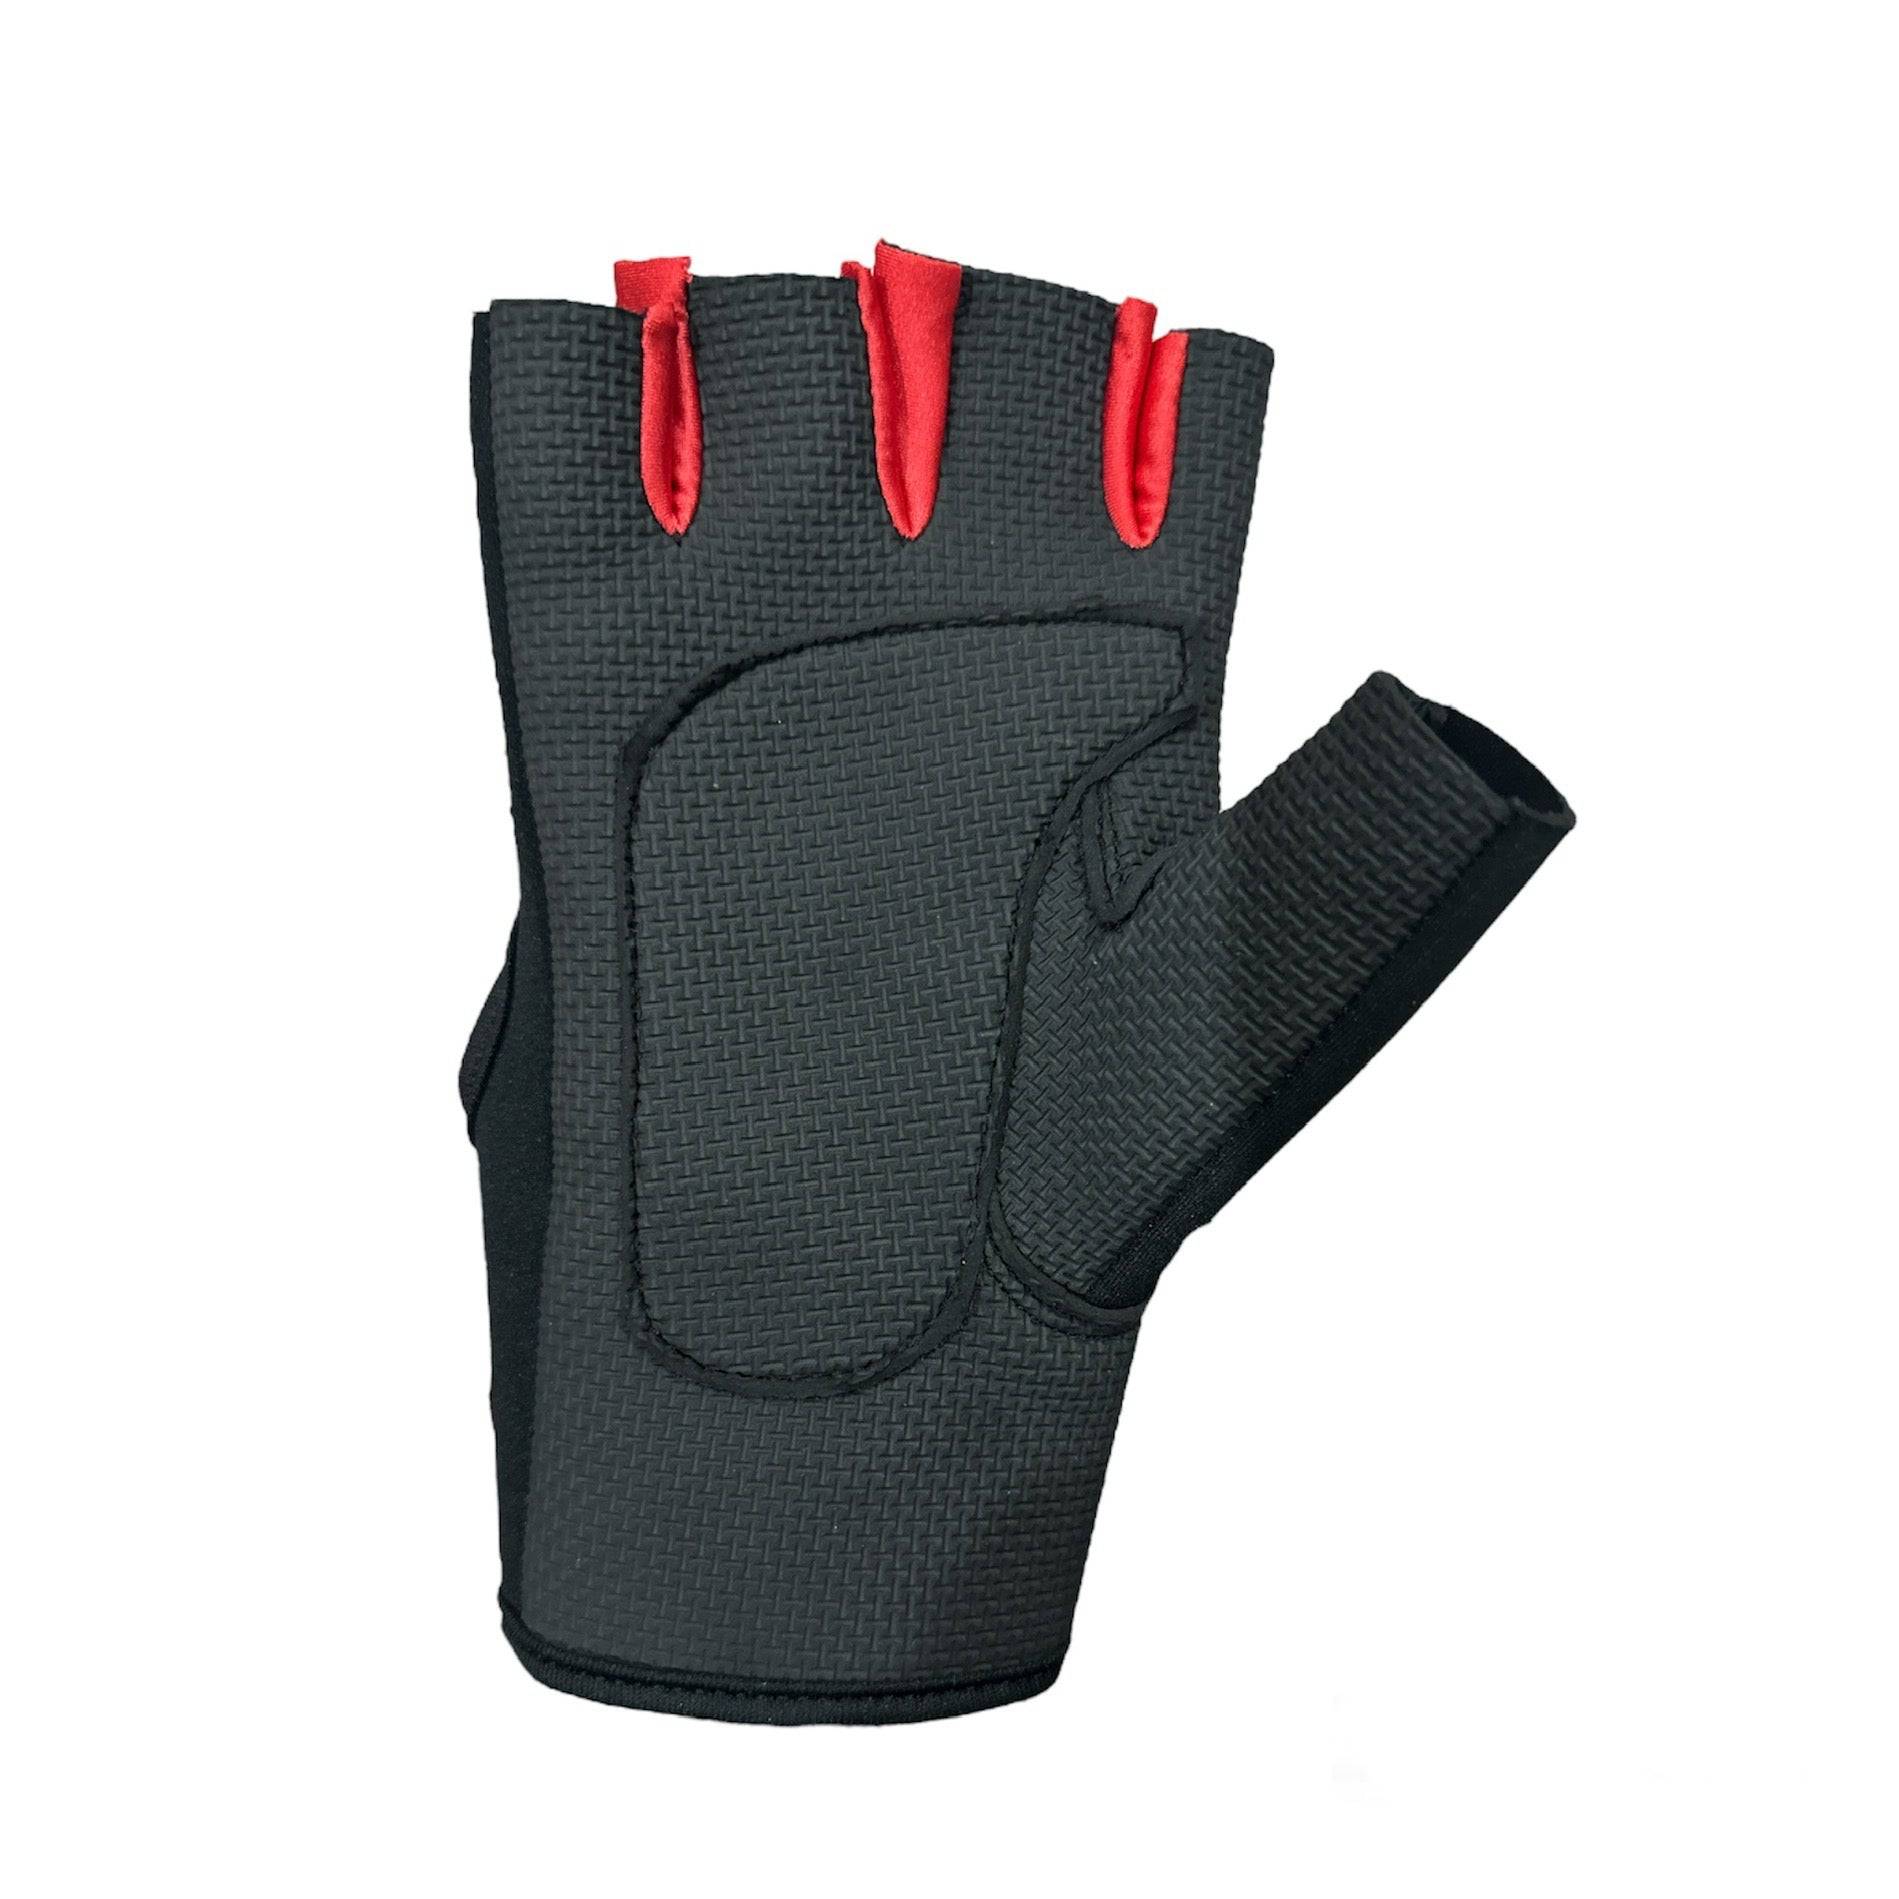 KGS G2 Weight Lifting Gym Gloves - Valetica Sports